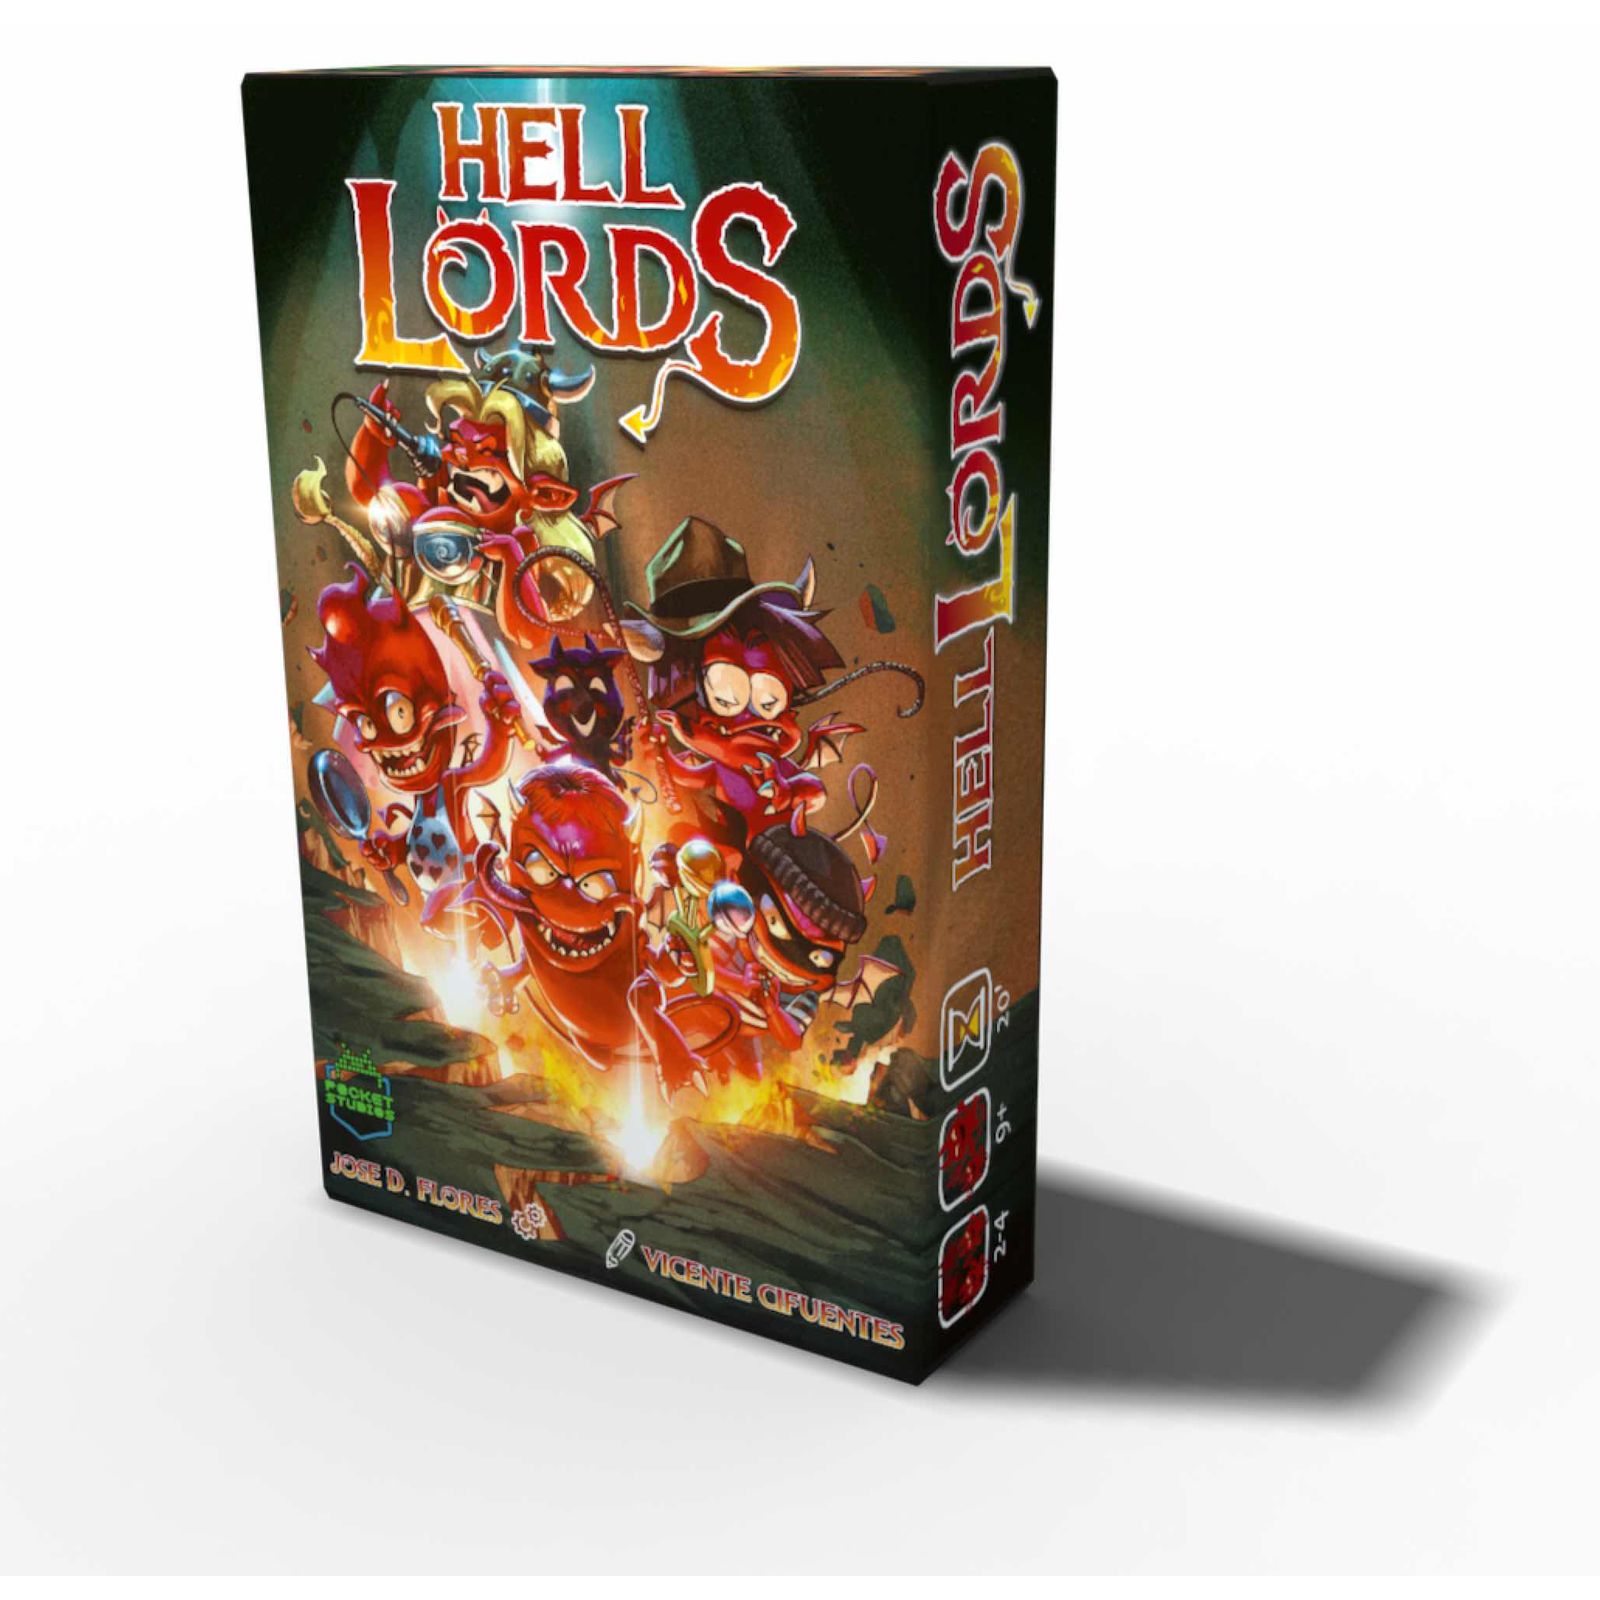 HELL LORDS